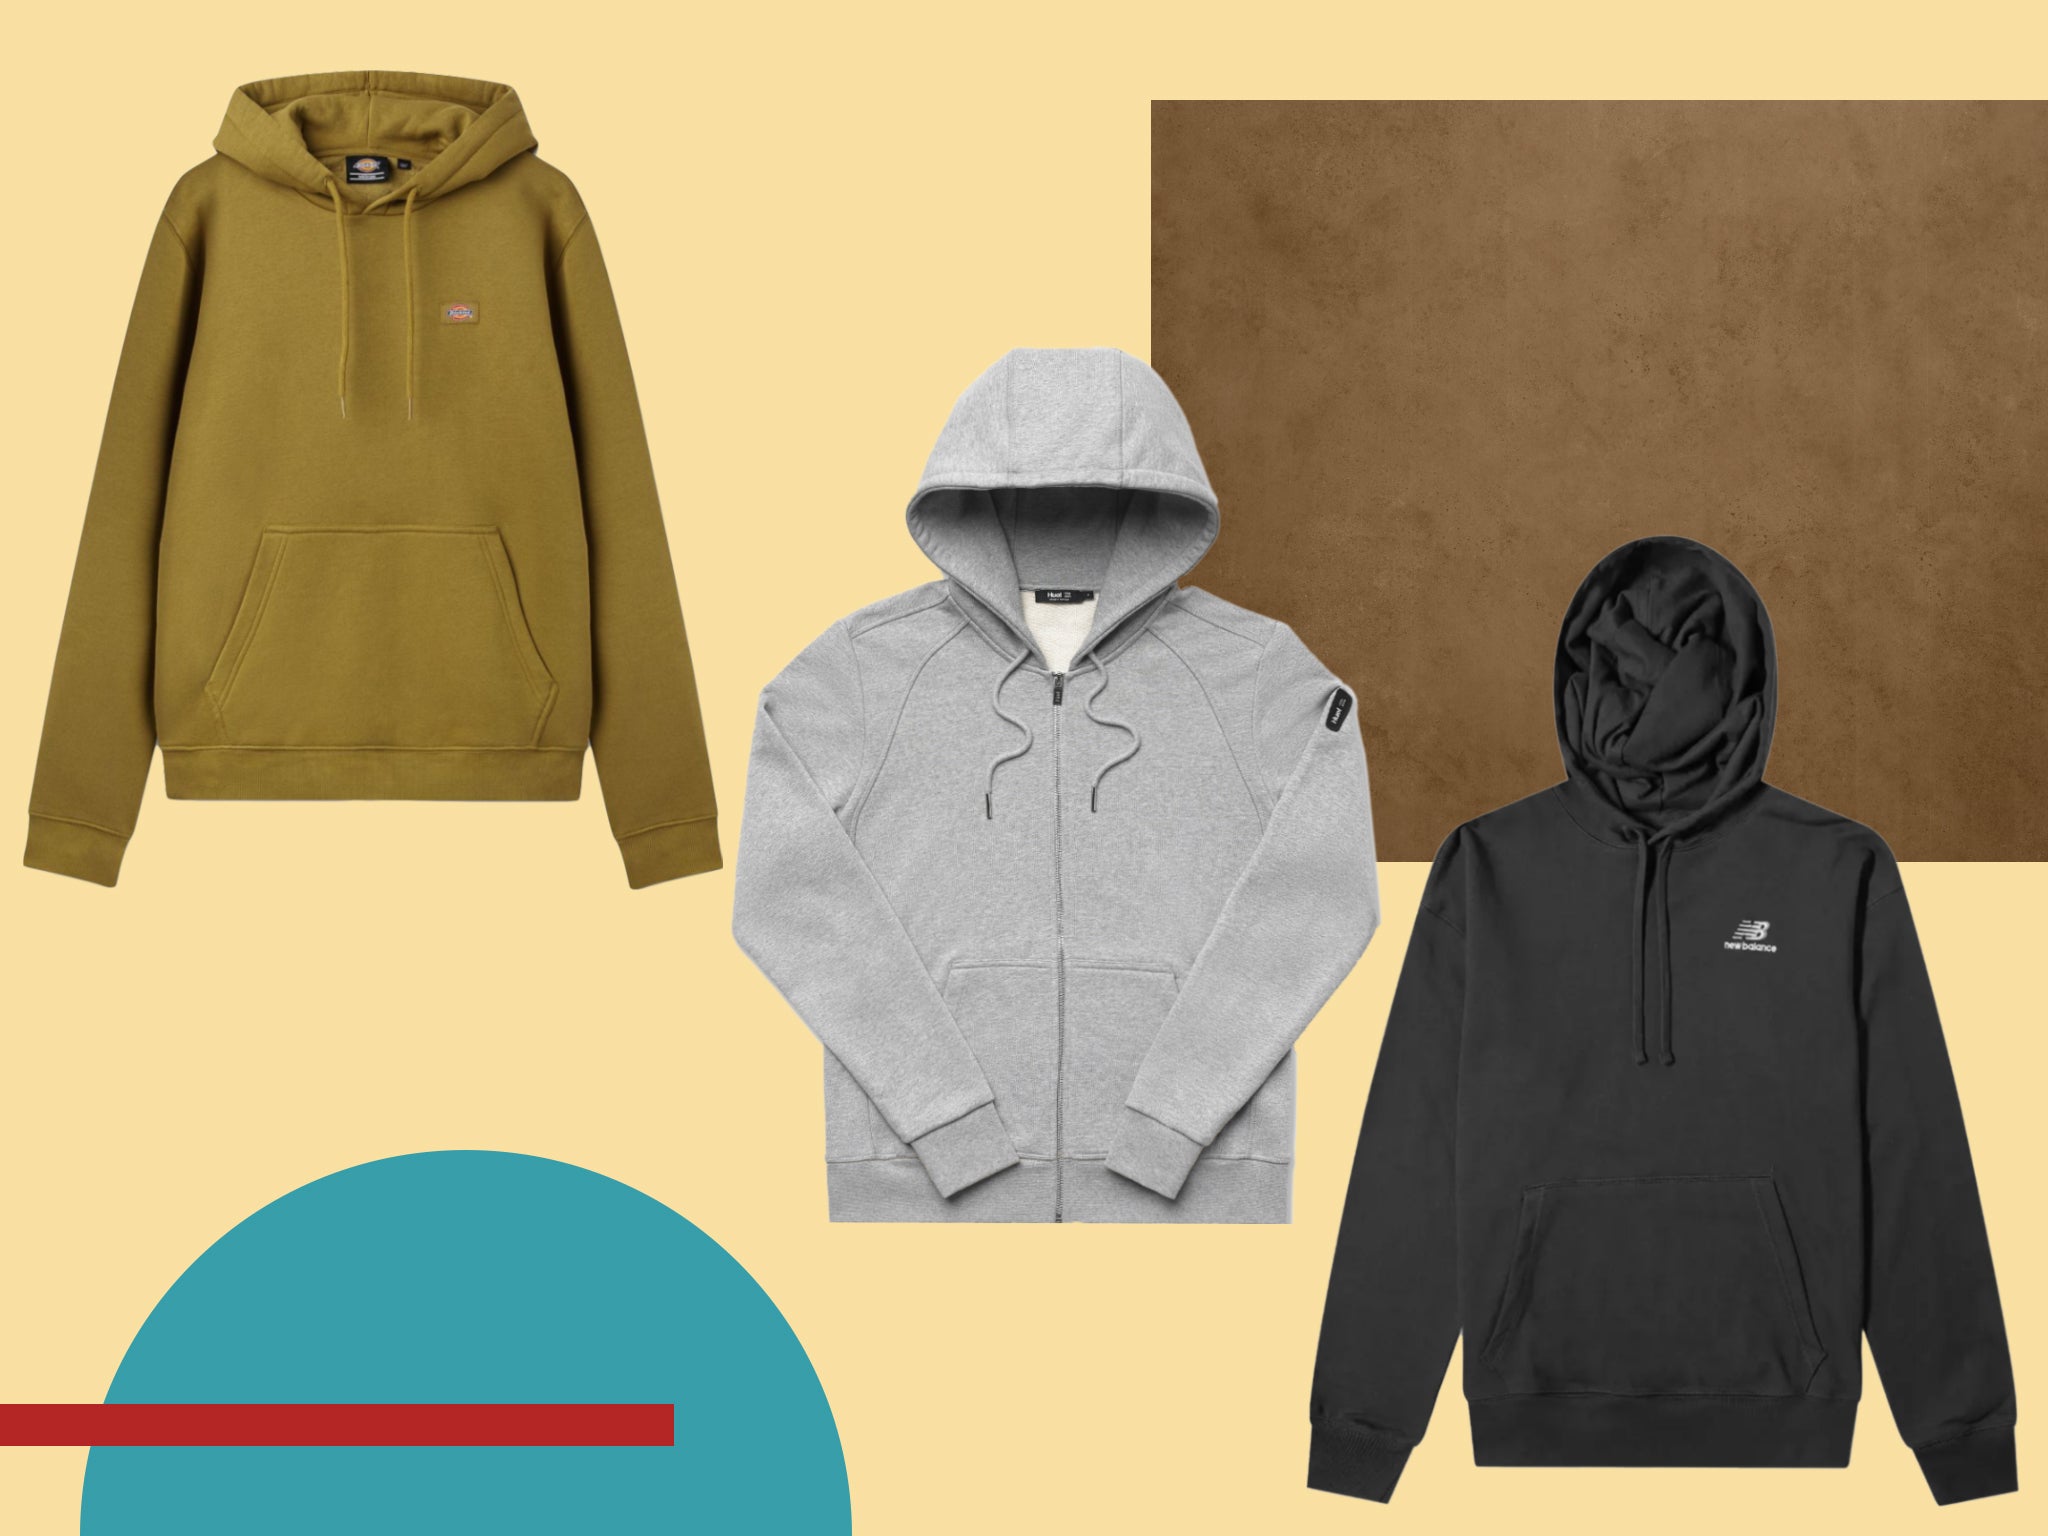 Best hoodies for men 2022: From zip ups to pullovers | The Independent